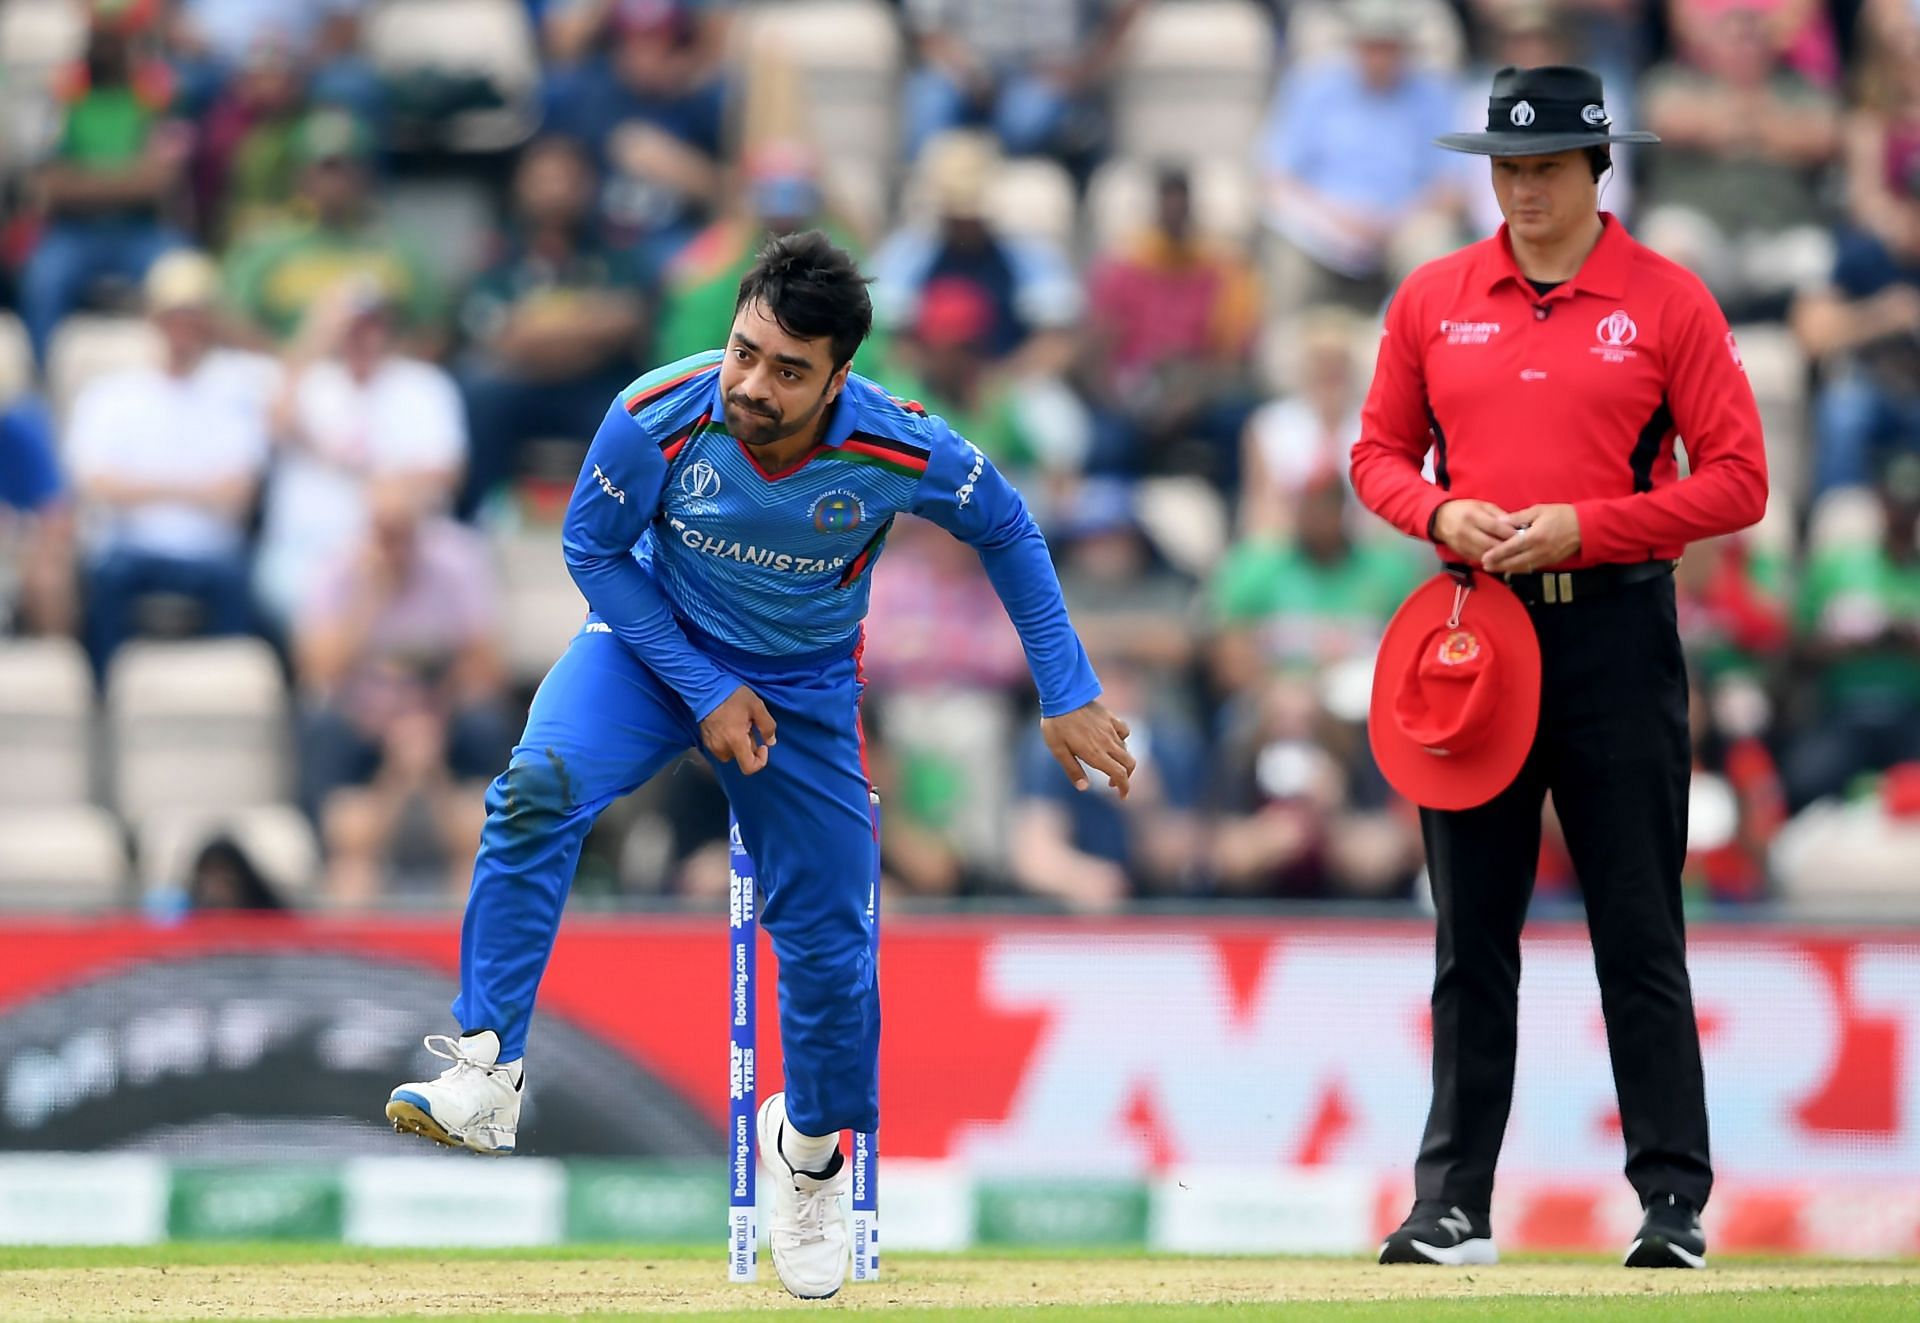 Rashid Khan will play a crucial role for Afghanistan (Credit: Getty Images)